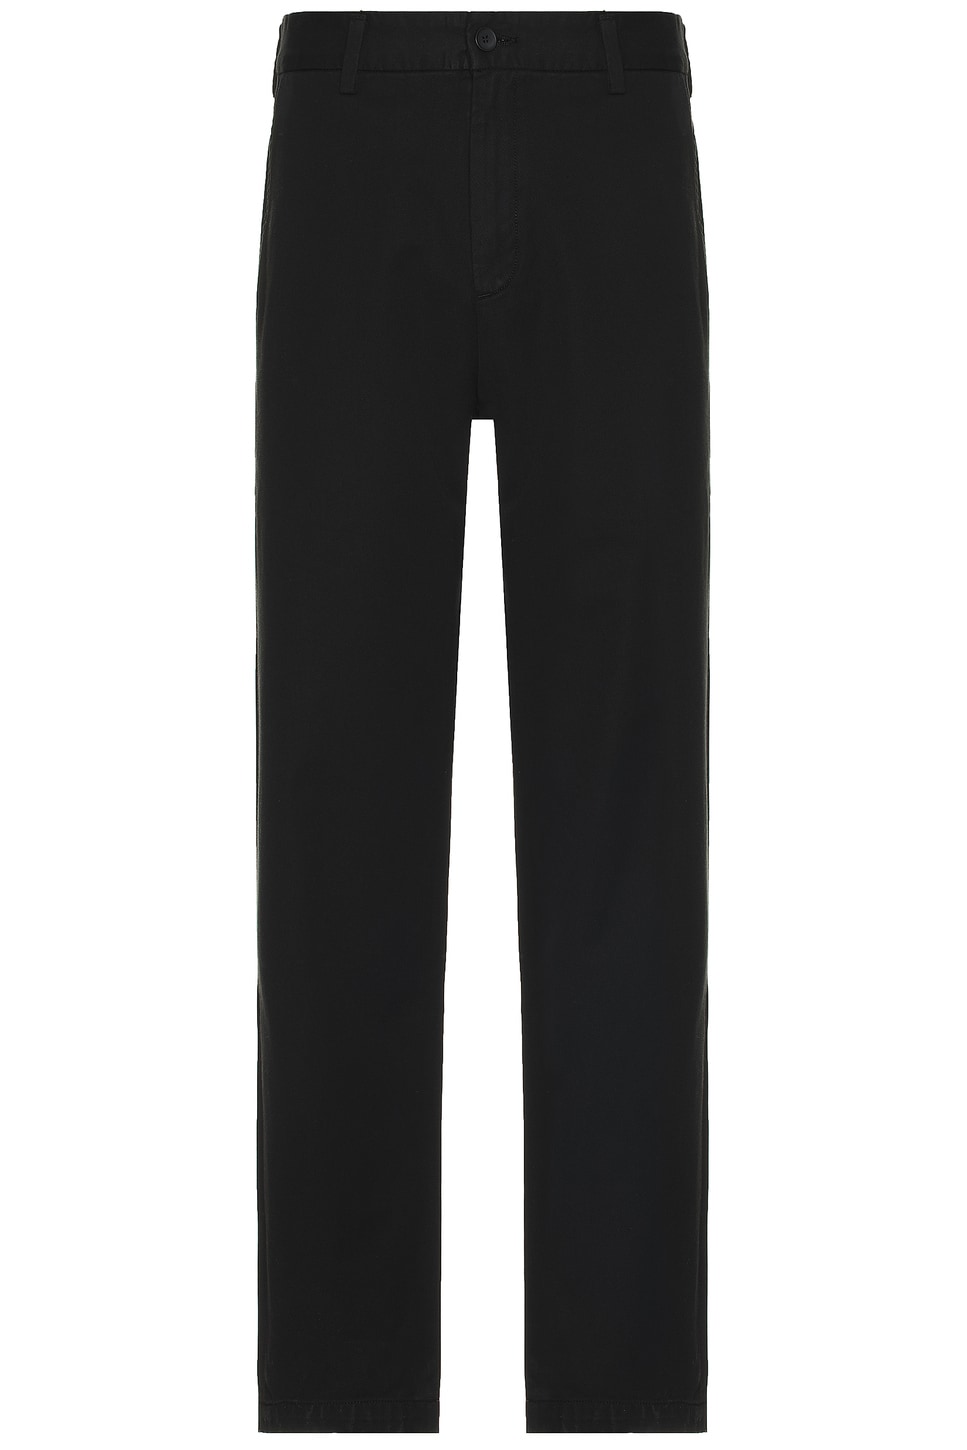 Image 1 of AGOLDE Vinson Chino in Black